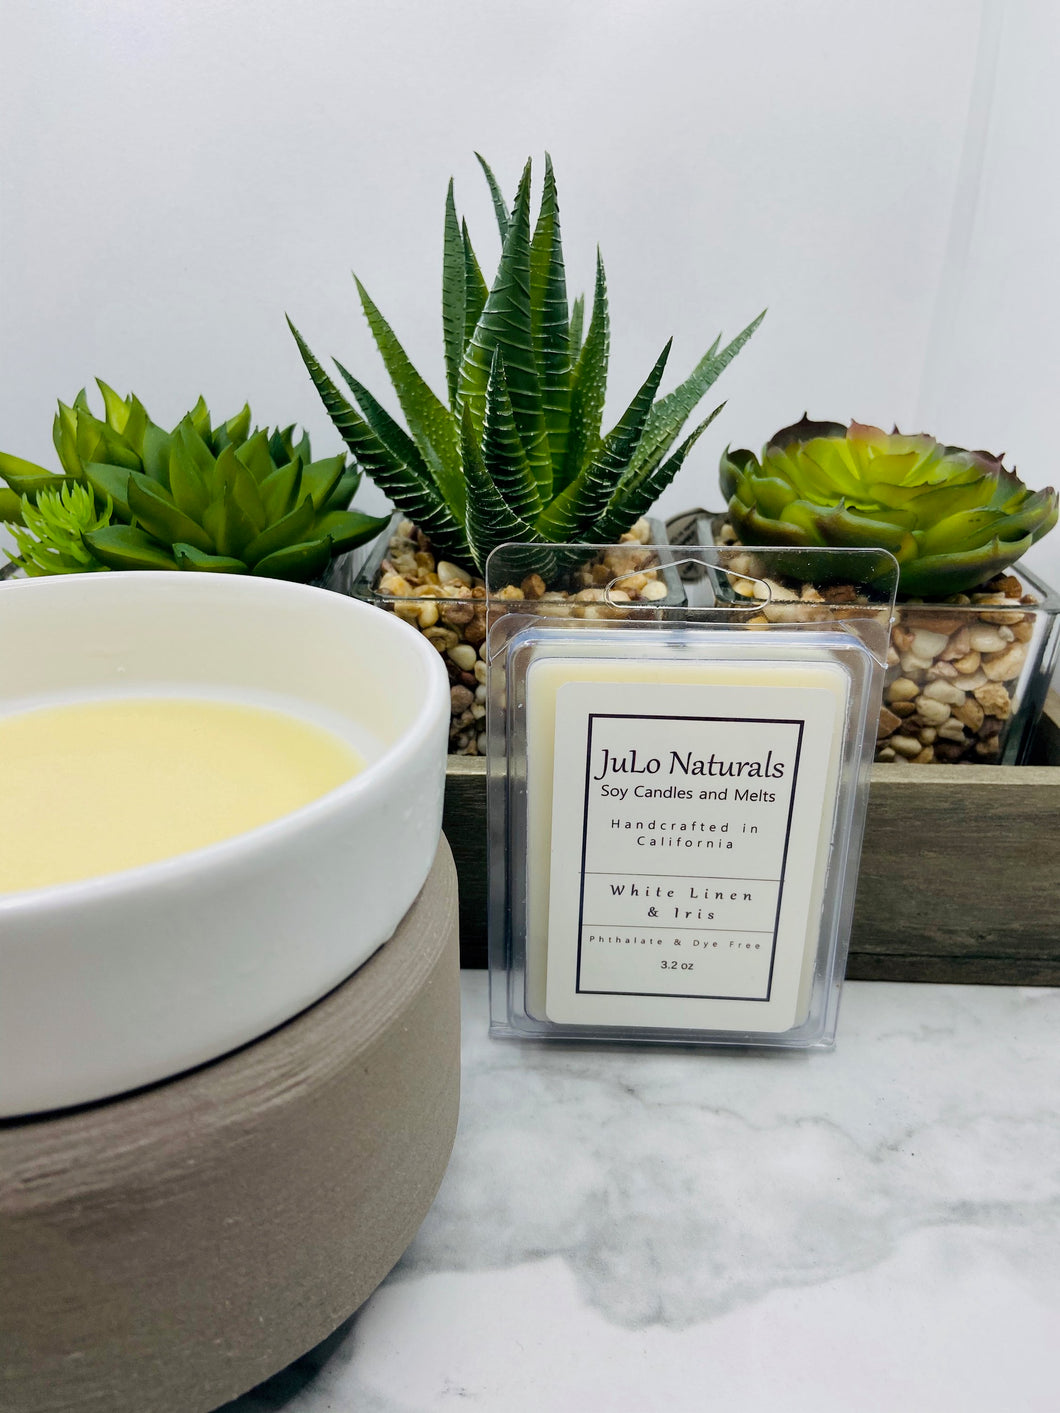 Our Soy Wax Melts are the perfect handmade candle gift for her or for your home!